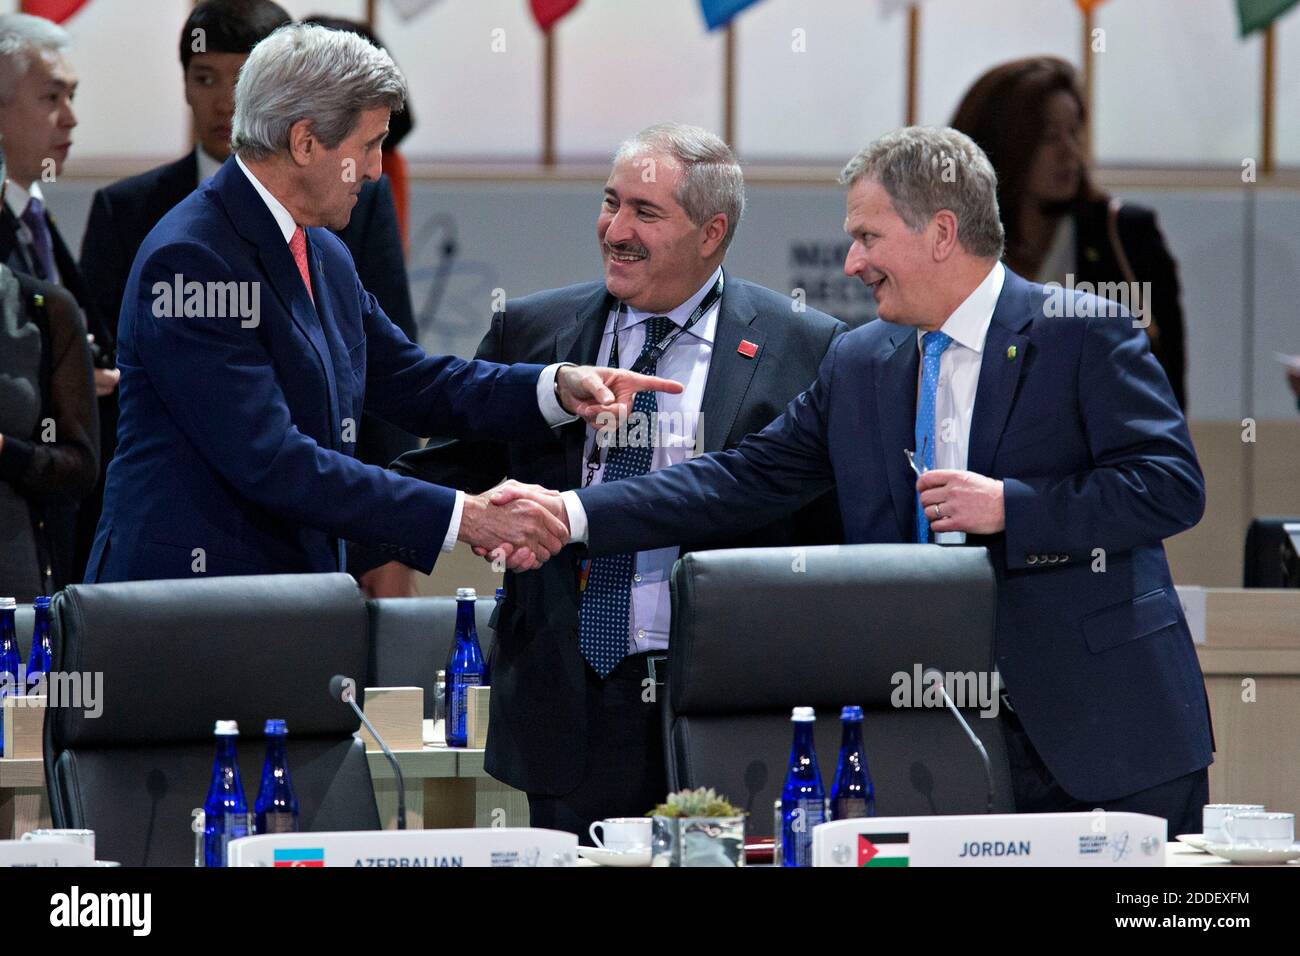 United States Secretary of State John Kerry, left, talks to Sauli Niinisto, Finland's president, right, and Nasser Judeh, Jordan's minister of foreign affairs, center, during a closing session at the Nuclear Security Summit in Washington, D.C., U.S., on Friday, April 1, 2016. After a spate of terrorist attacks from Europe to Africa, U.S. President Barack Obama is rallying international support during the summit for an effort to keep Islamic State and similar groups from obtaining nuclear material and other weapons of mass destruction. Credit: Andrew Harrer / Pool via CNP /MediaPunch Stock Photo